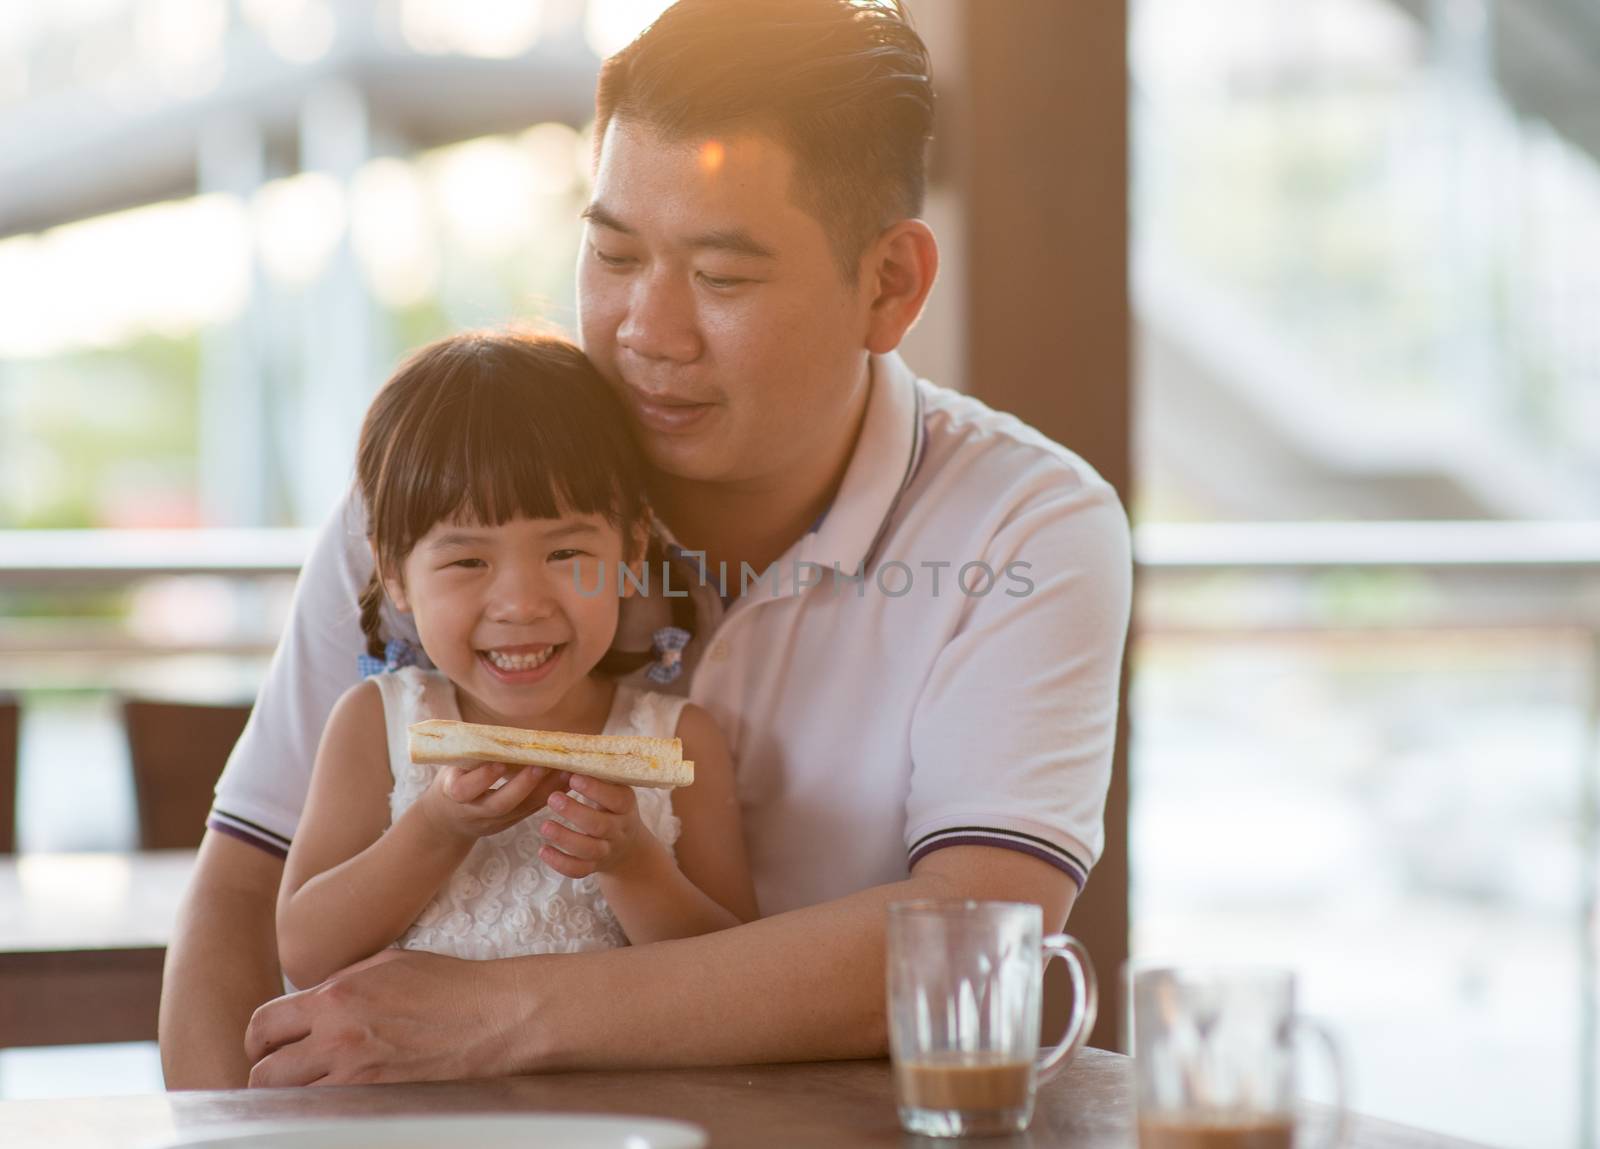 Adorable Asian child eating butter toast at cafe. Outdoor family lifestyle with natural light.